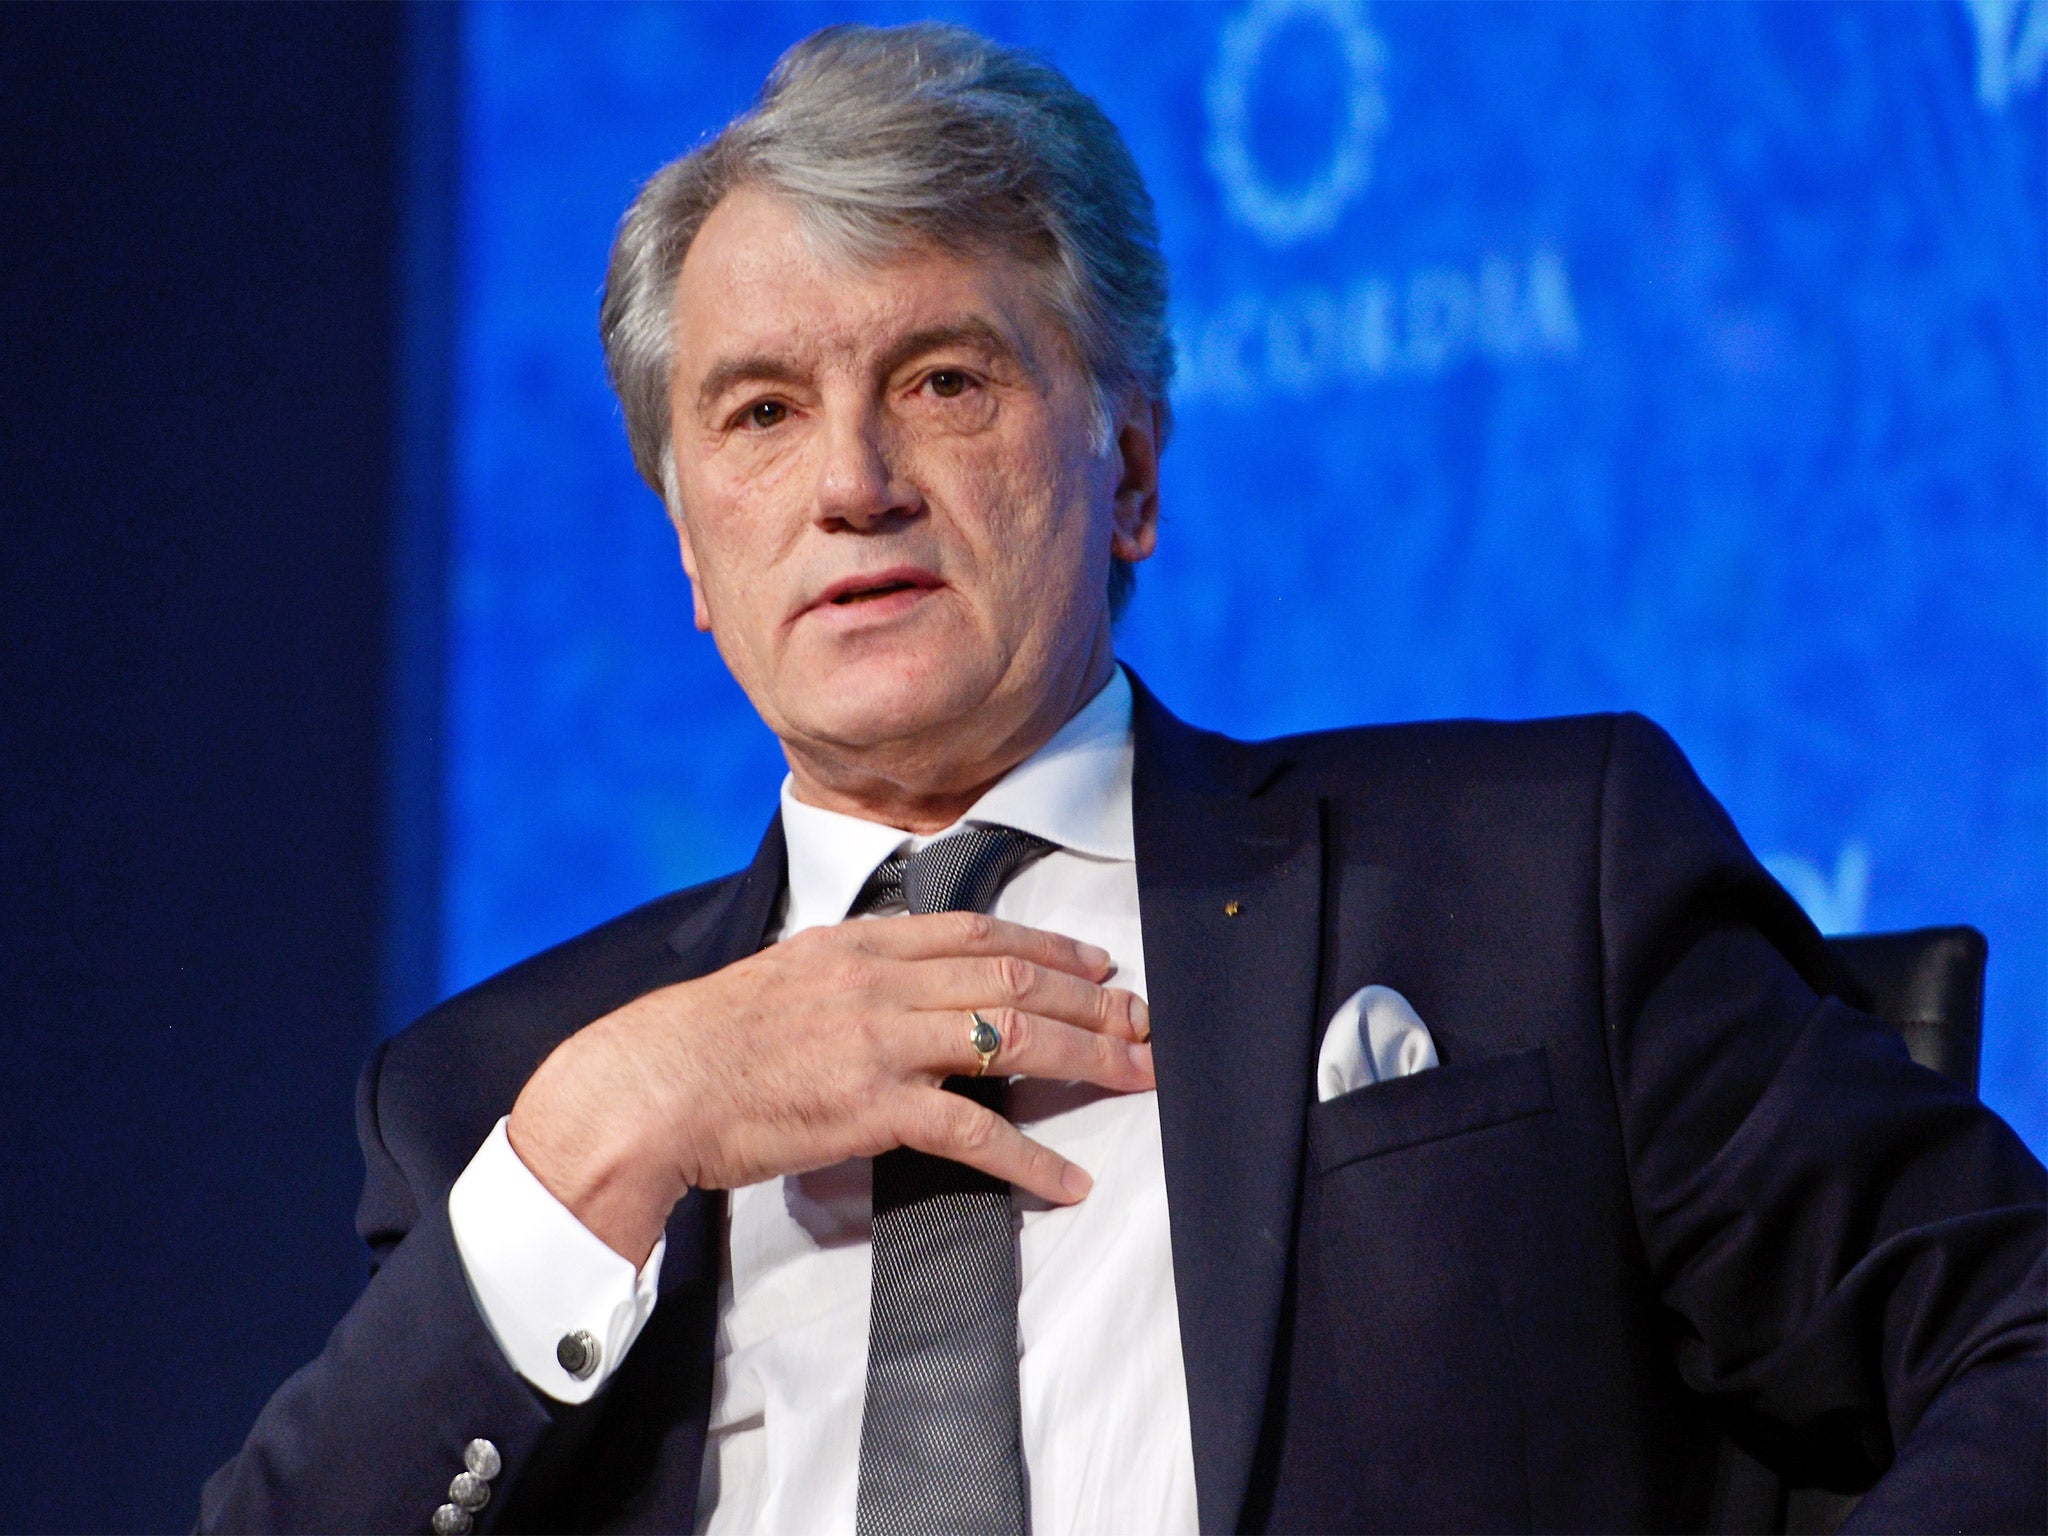 Viktor Yushchenko speaking at the Concordia Summit on public-private partnerships in New York earlier this month